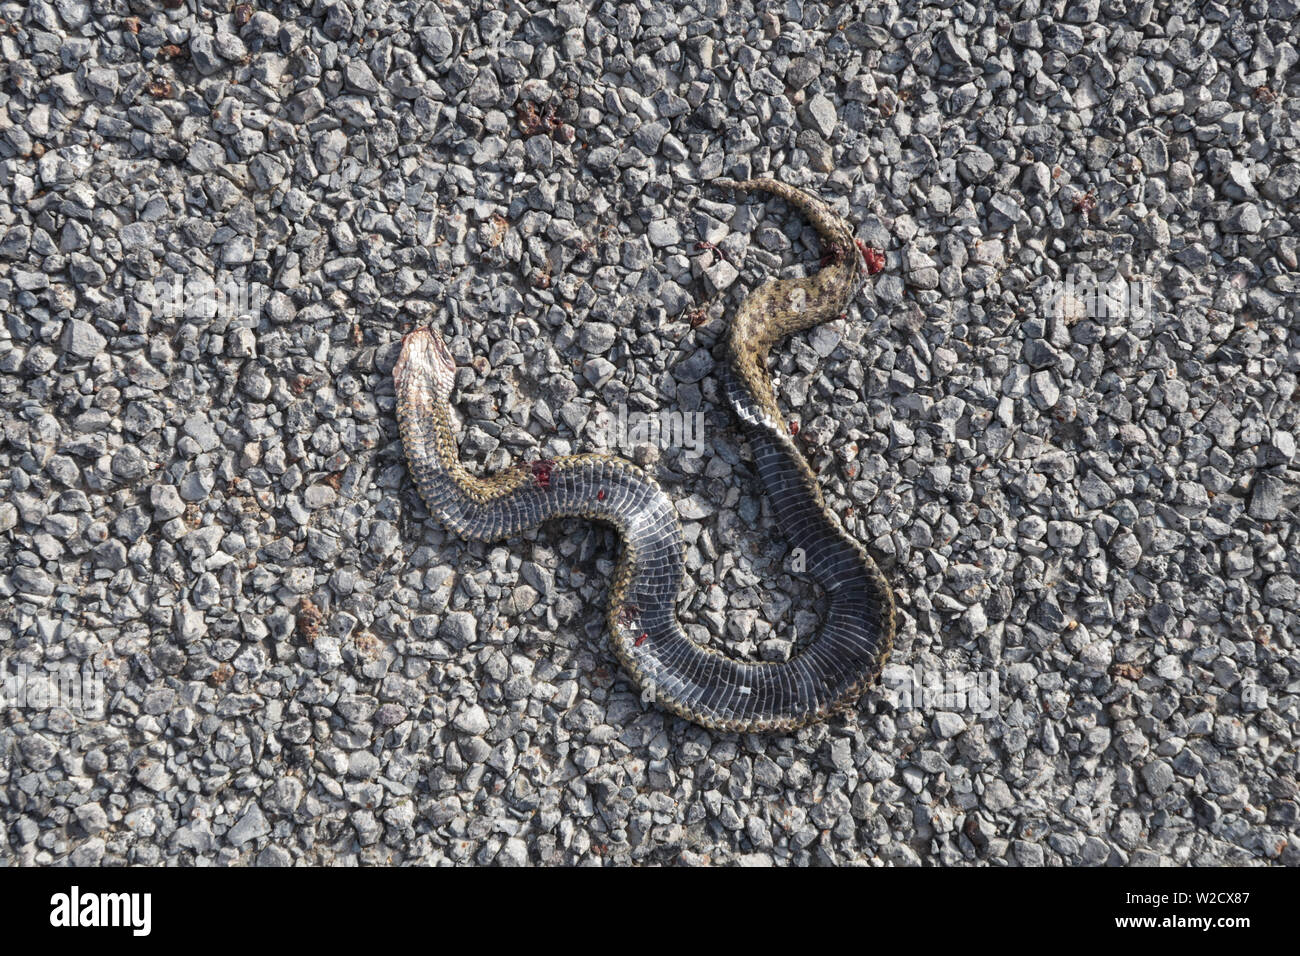 Common European adder. Latin name Vipera berus, also known as viper, roadkill victim flattened by passing vehicle showing scales and underside constru Stock Photo